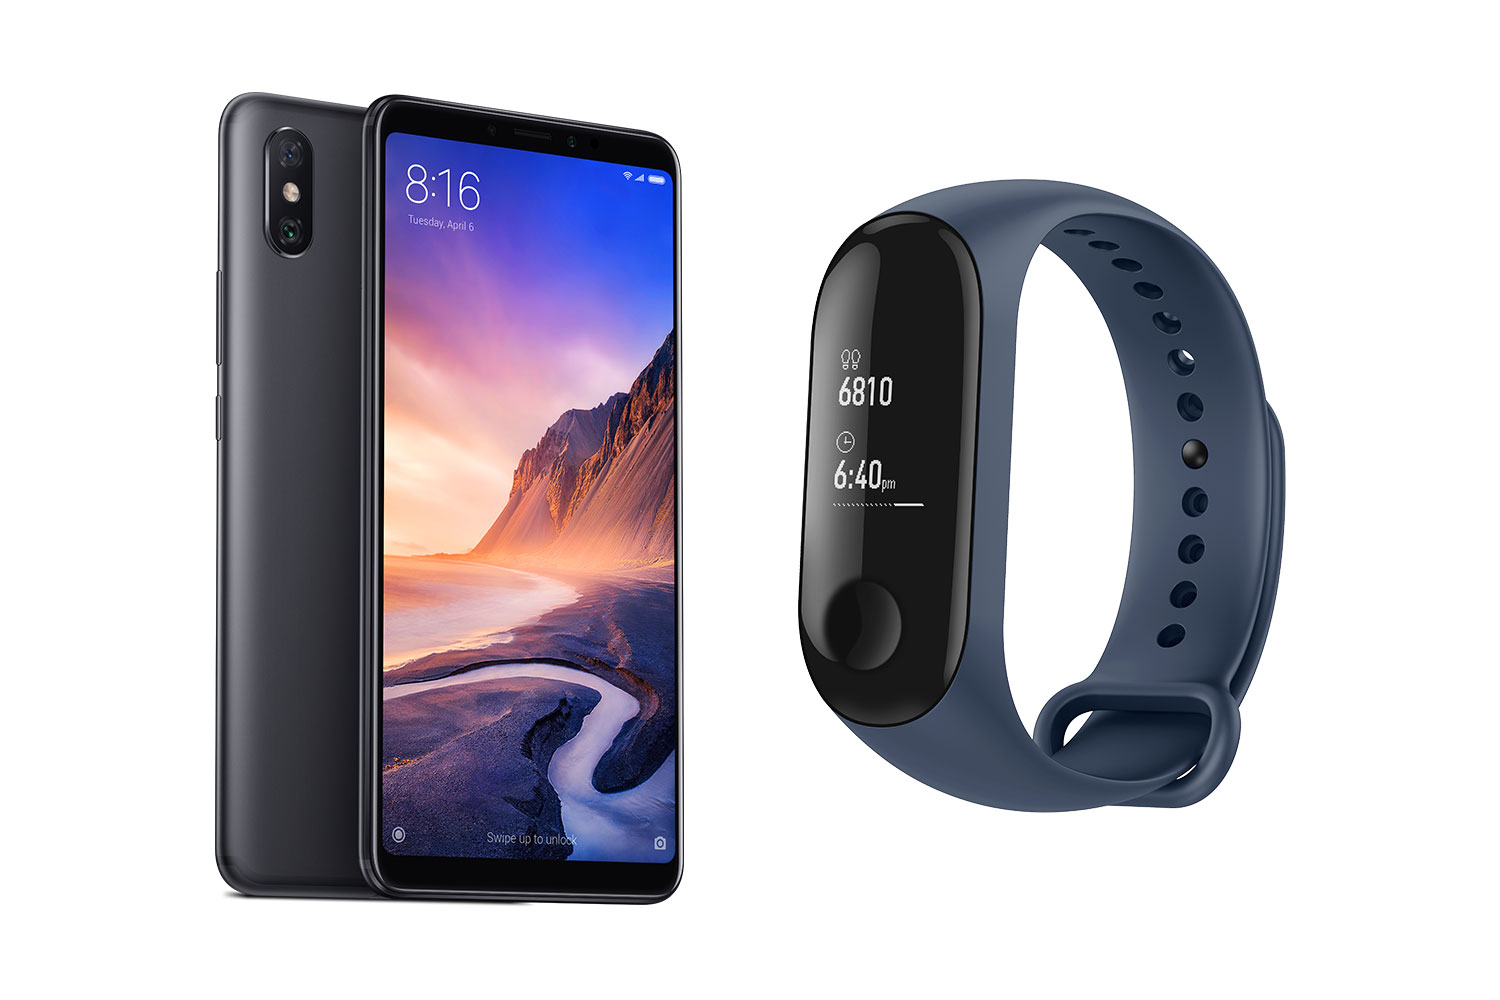 Xiaomi Mi Max 3 and Mi Band 3 Now Available in Malaysia